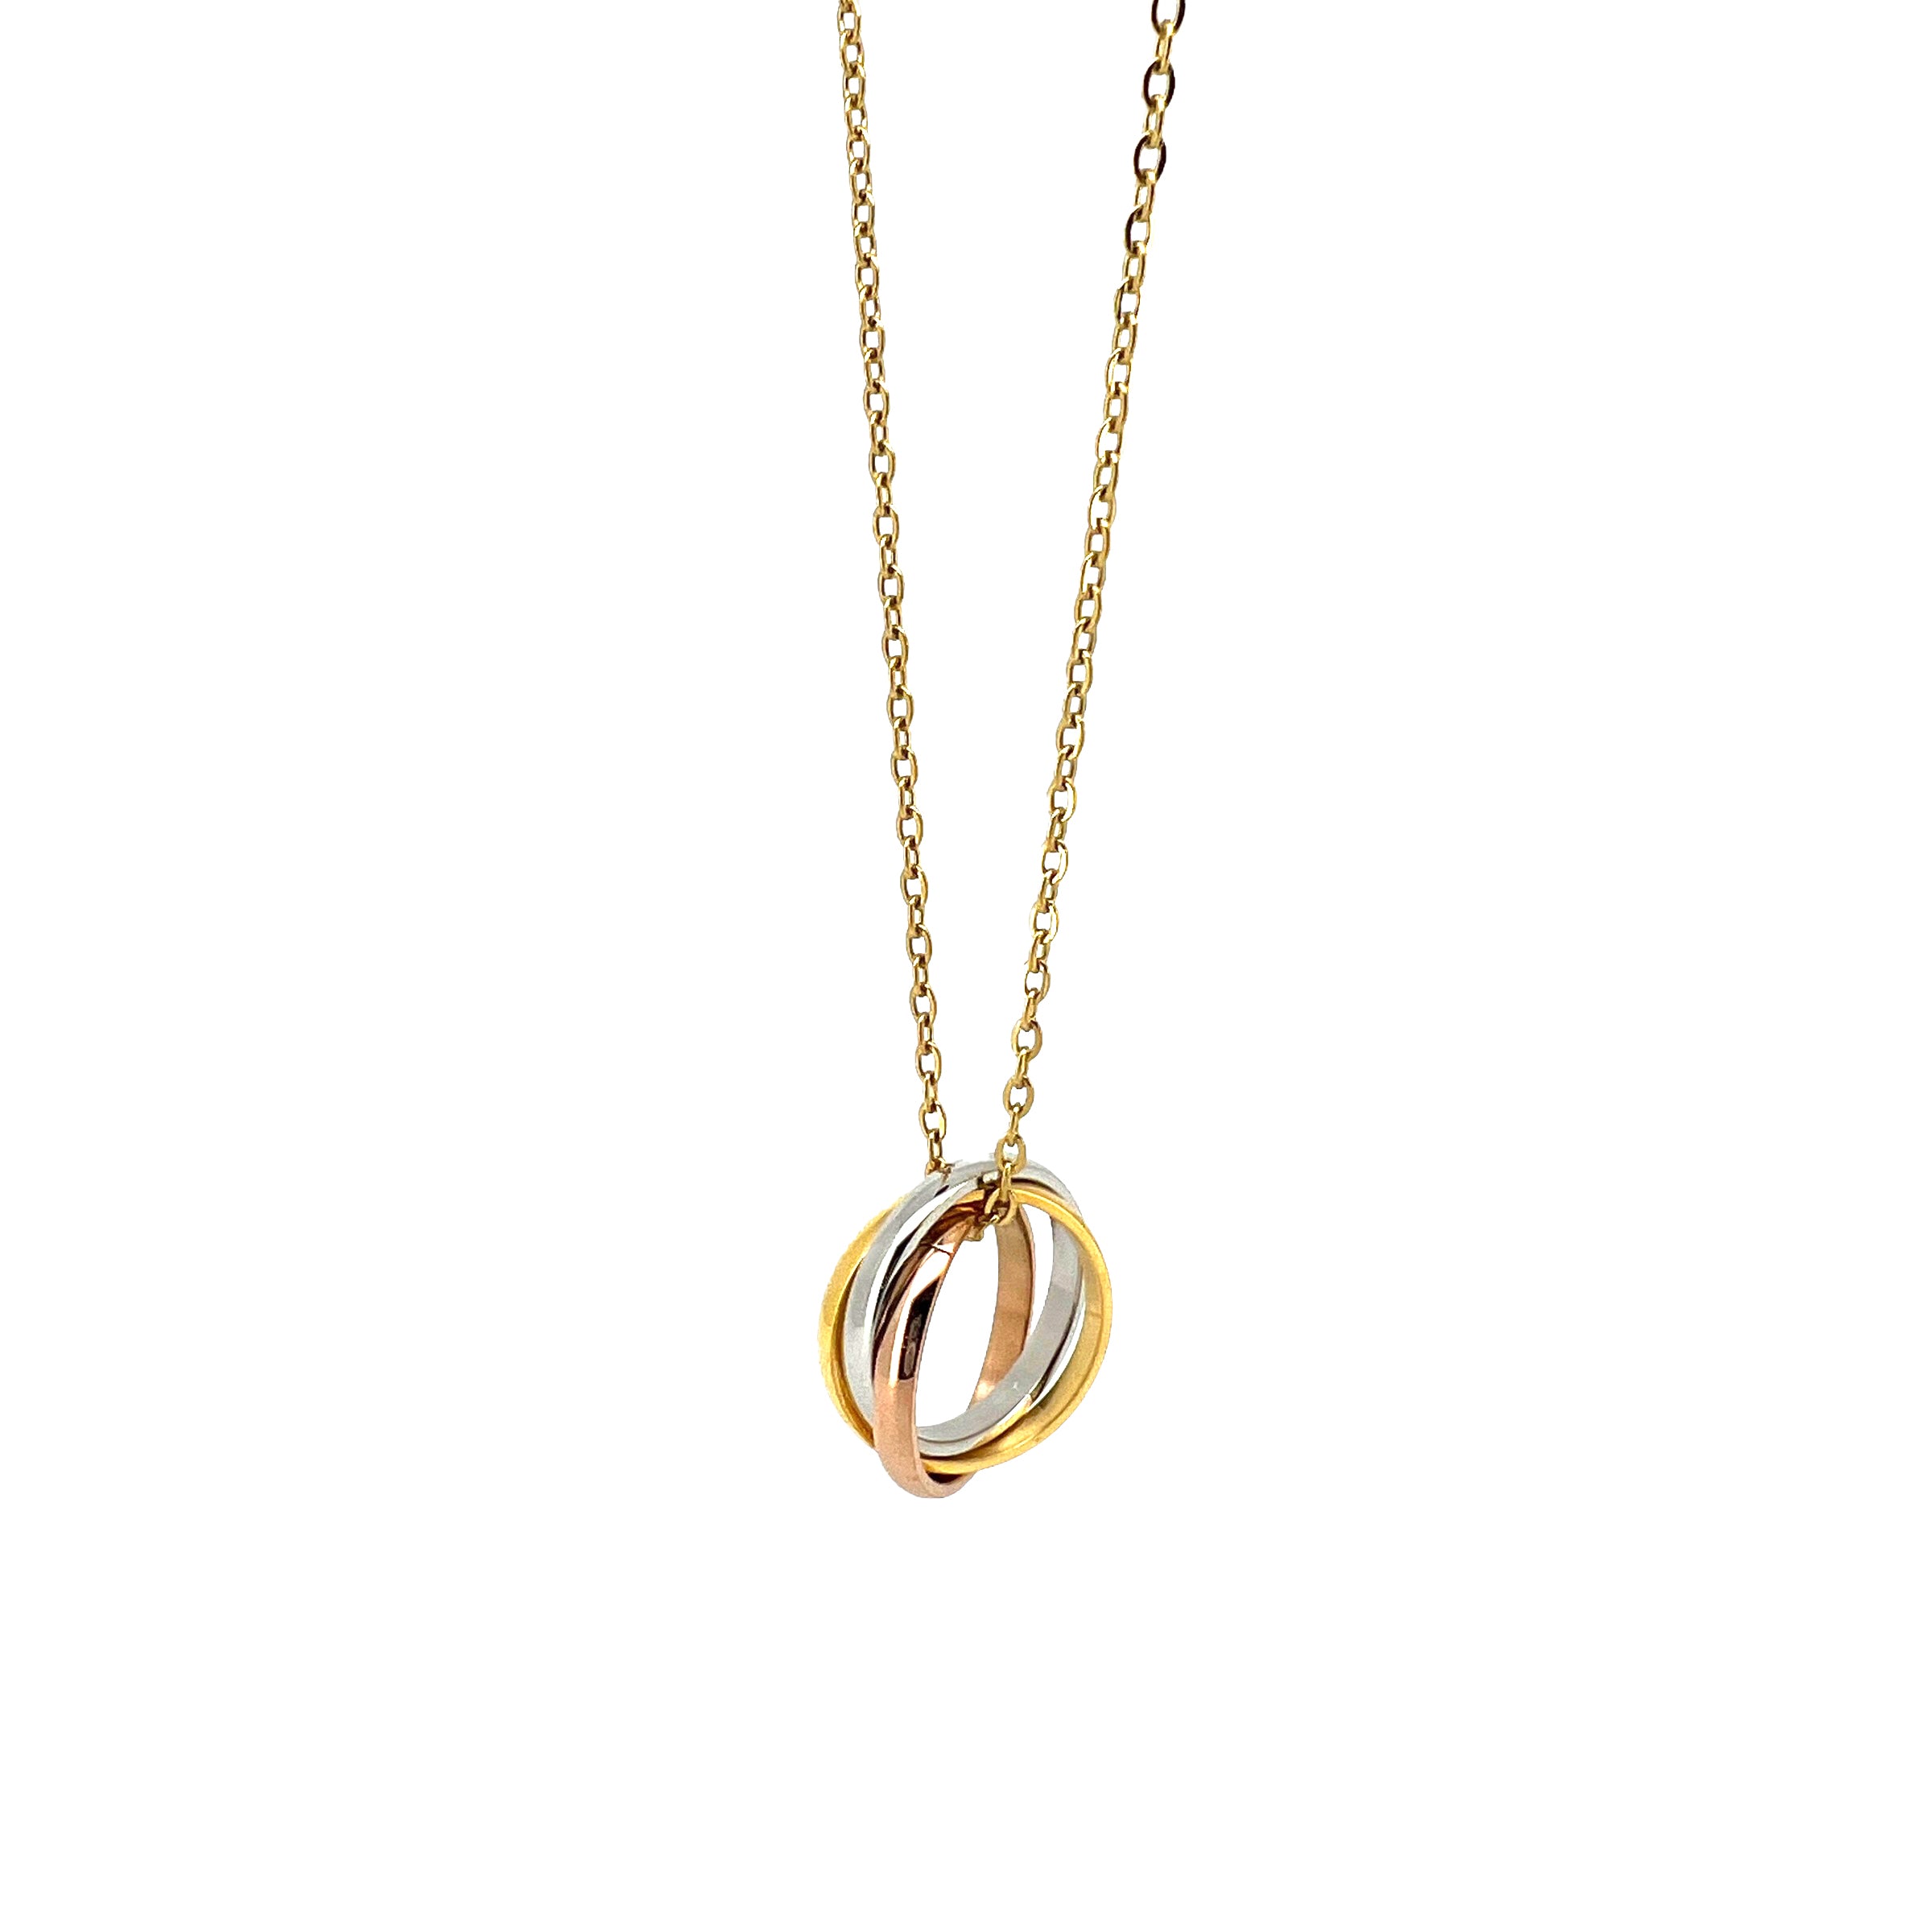 Jack Stainless Steel Necklace with Interlock Pendant